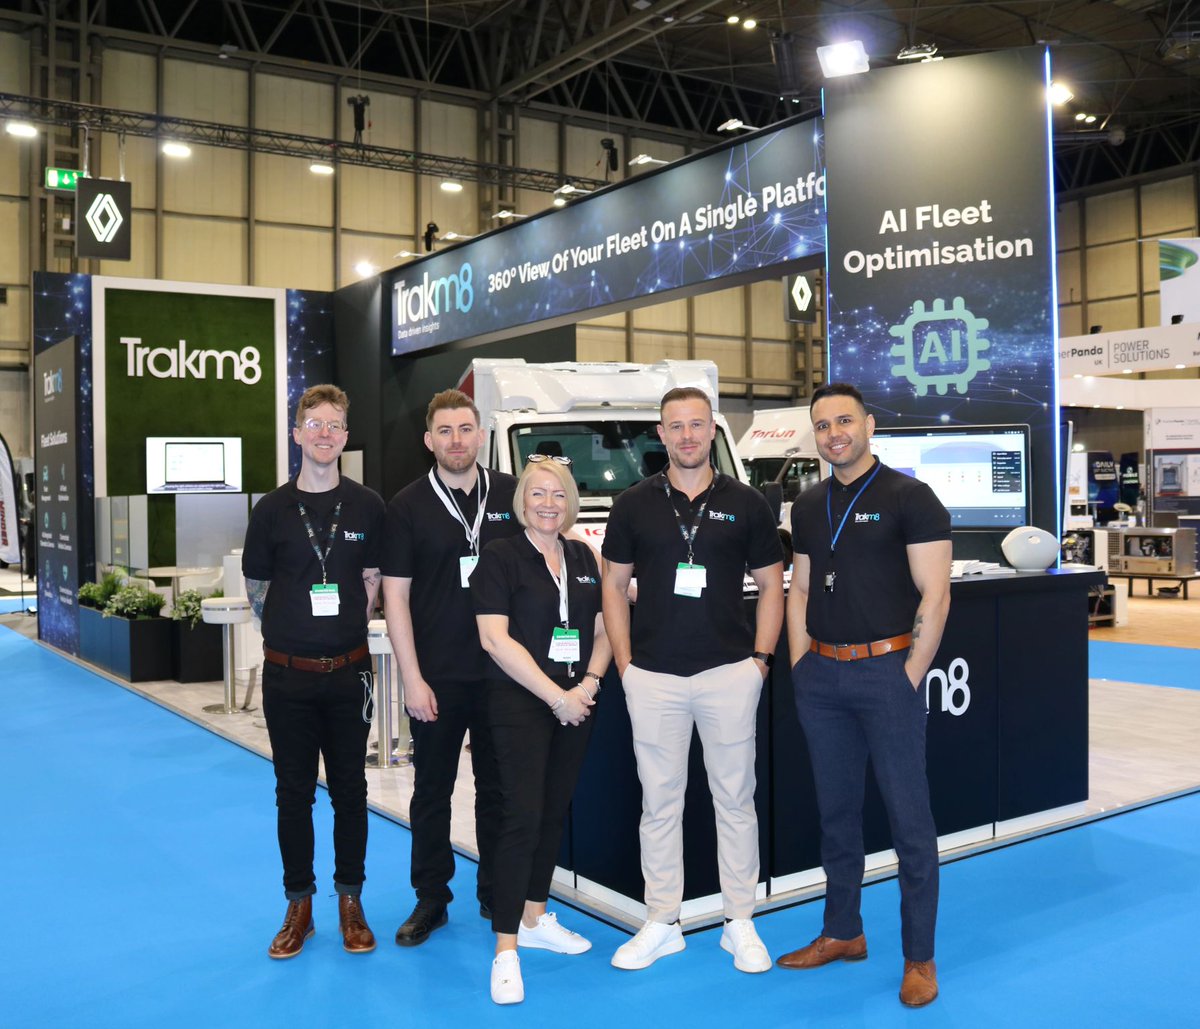 Day 1 is over what a fantastic start at the @TheCVShow! Anticipating an even more exciting day 2. Swing by our stand and experience first-hand the cutting-edge fleet technology from @Trakm8, designed to optimise your fleet efficiency! #CVShow #CVShow2024 #Fleet